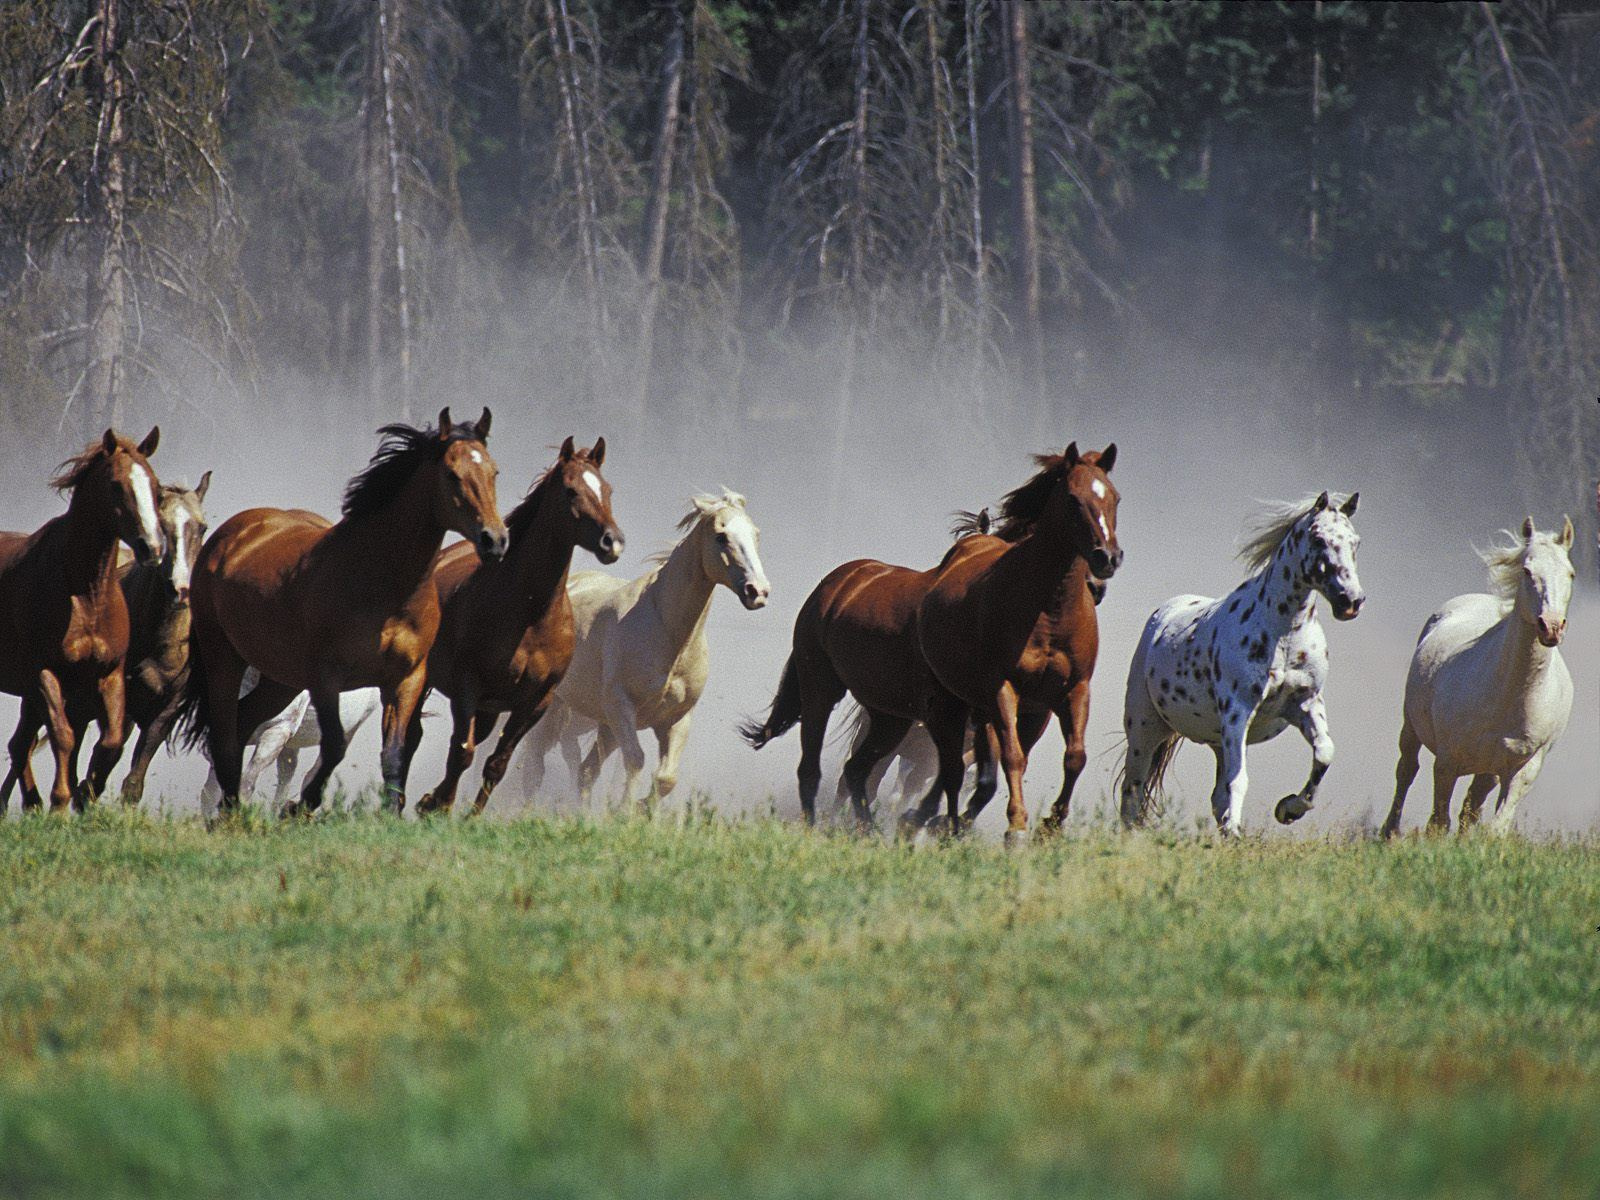 Horses Free Stock Photos Reviewed by mas pono on Rating: 4.5